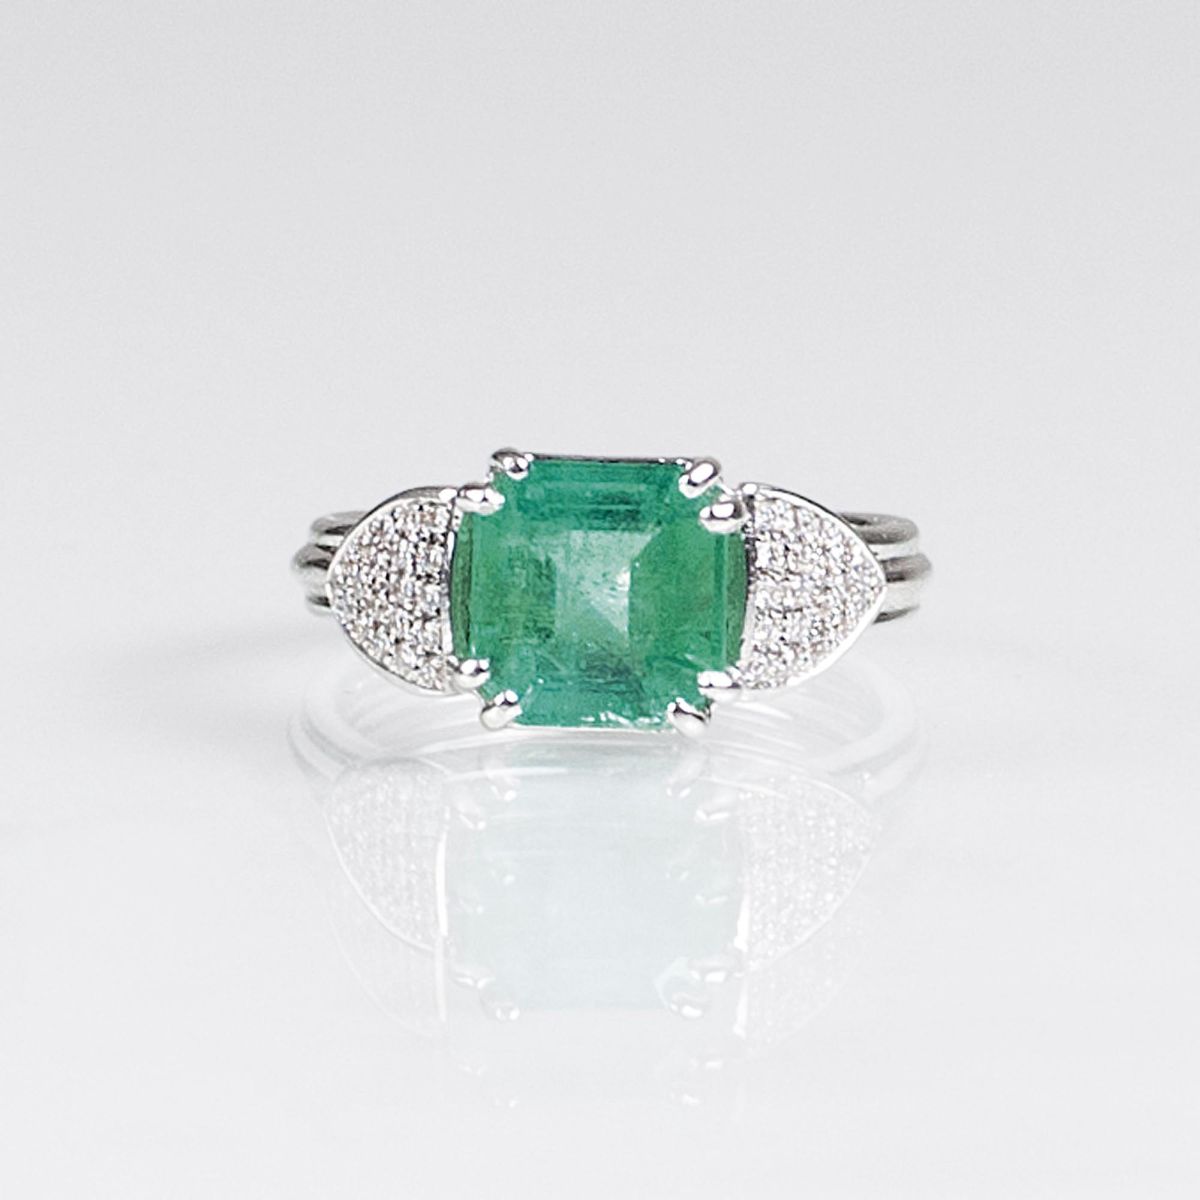 A Colombian Emerald Ring with Diamonds